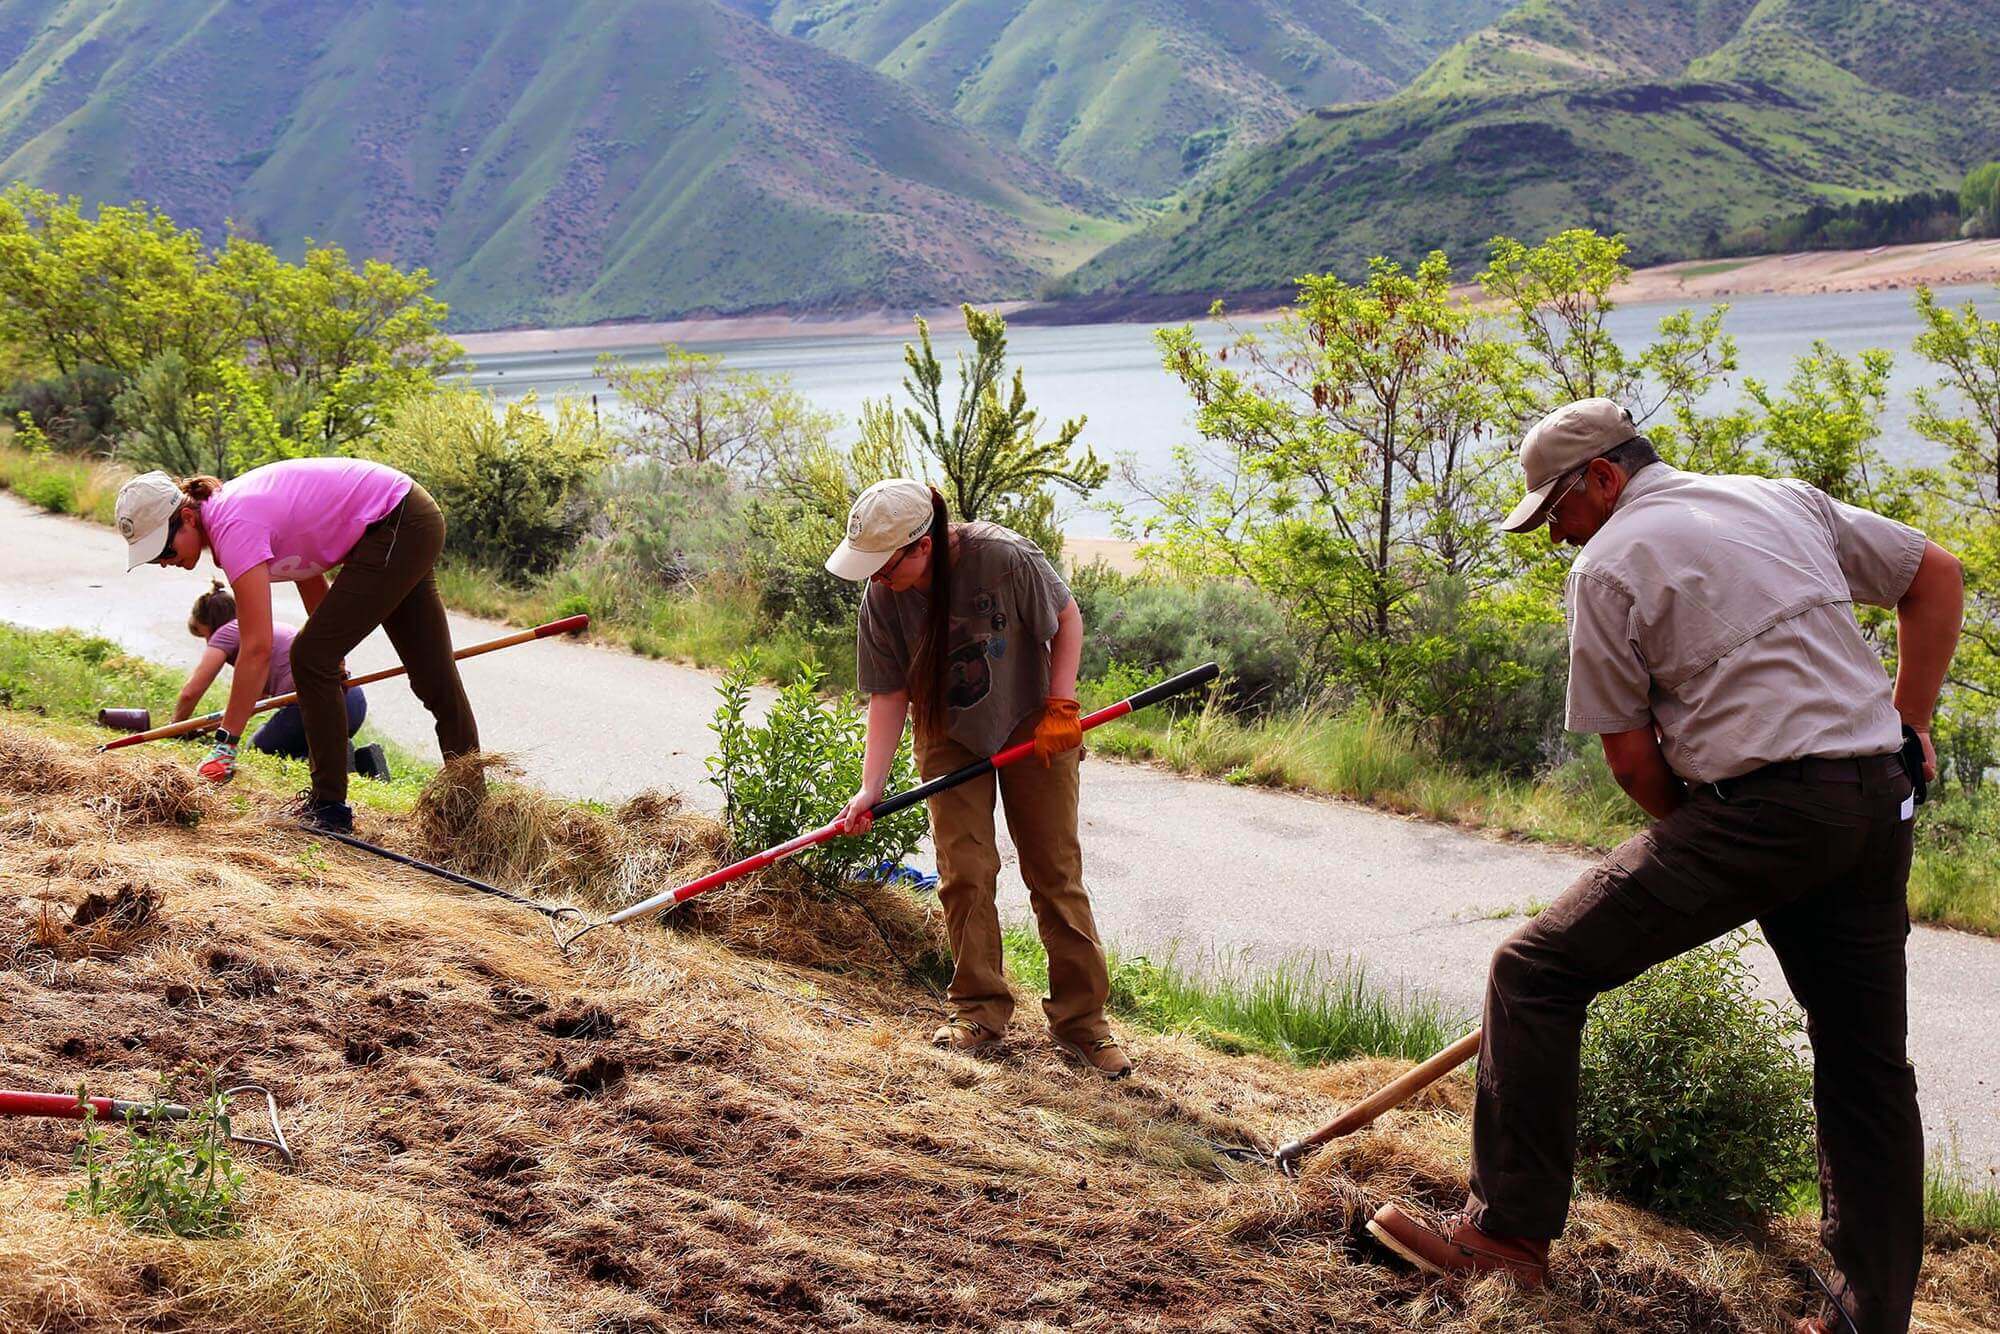 Three people at a Travel With Care event holding garden hoes standing on a sloped hill and a paved path, a body of water and mountains in the background.